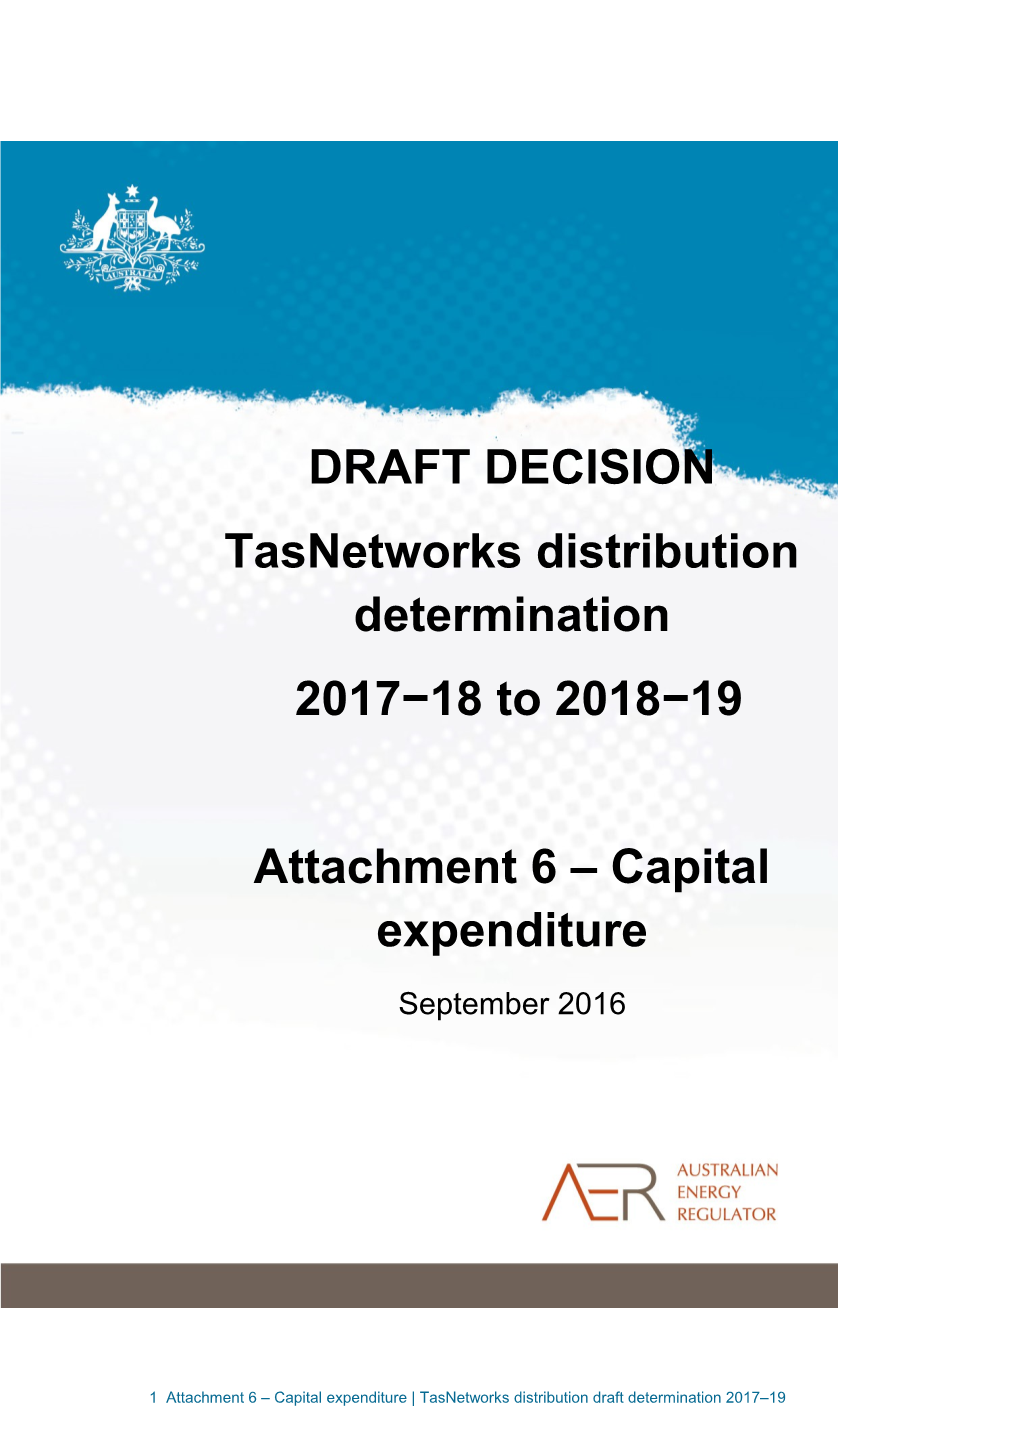 AER Draft Decision - Tasnetworks - Attachment 6 - Capital Expenditure